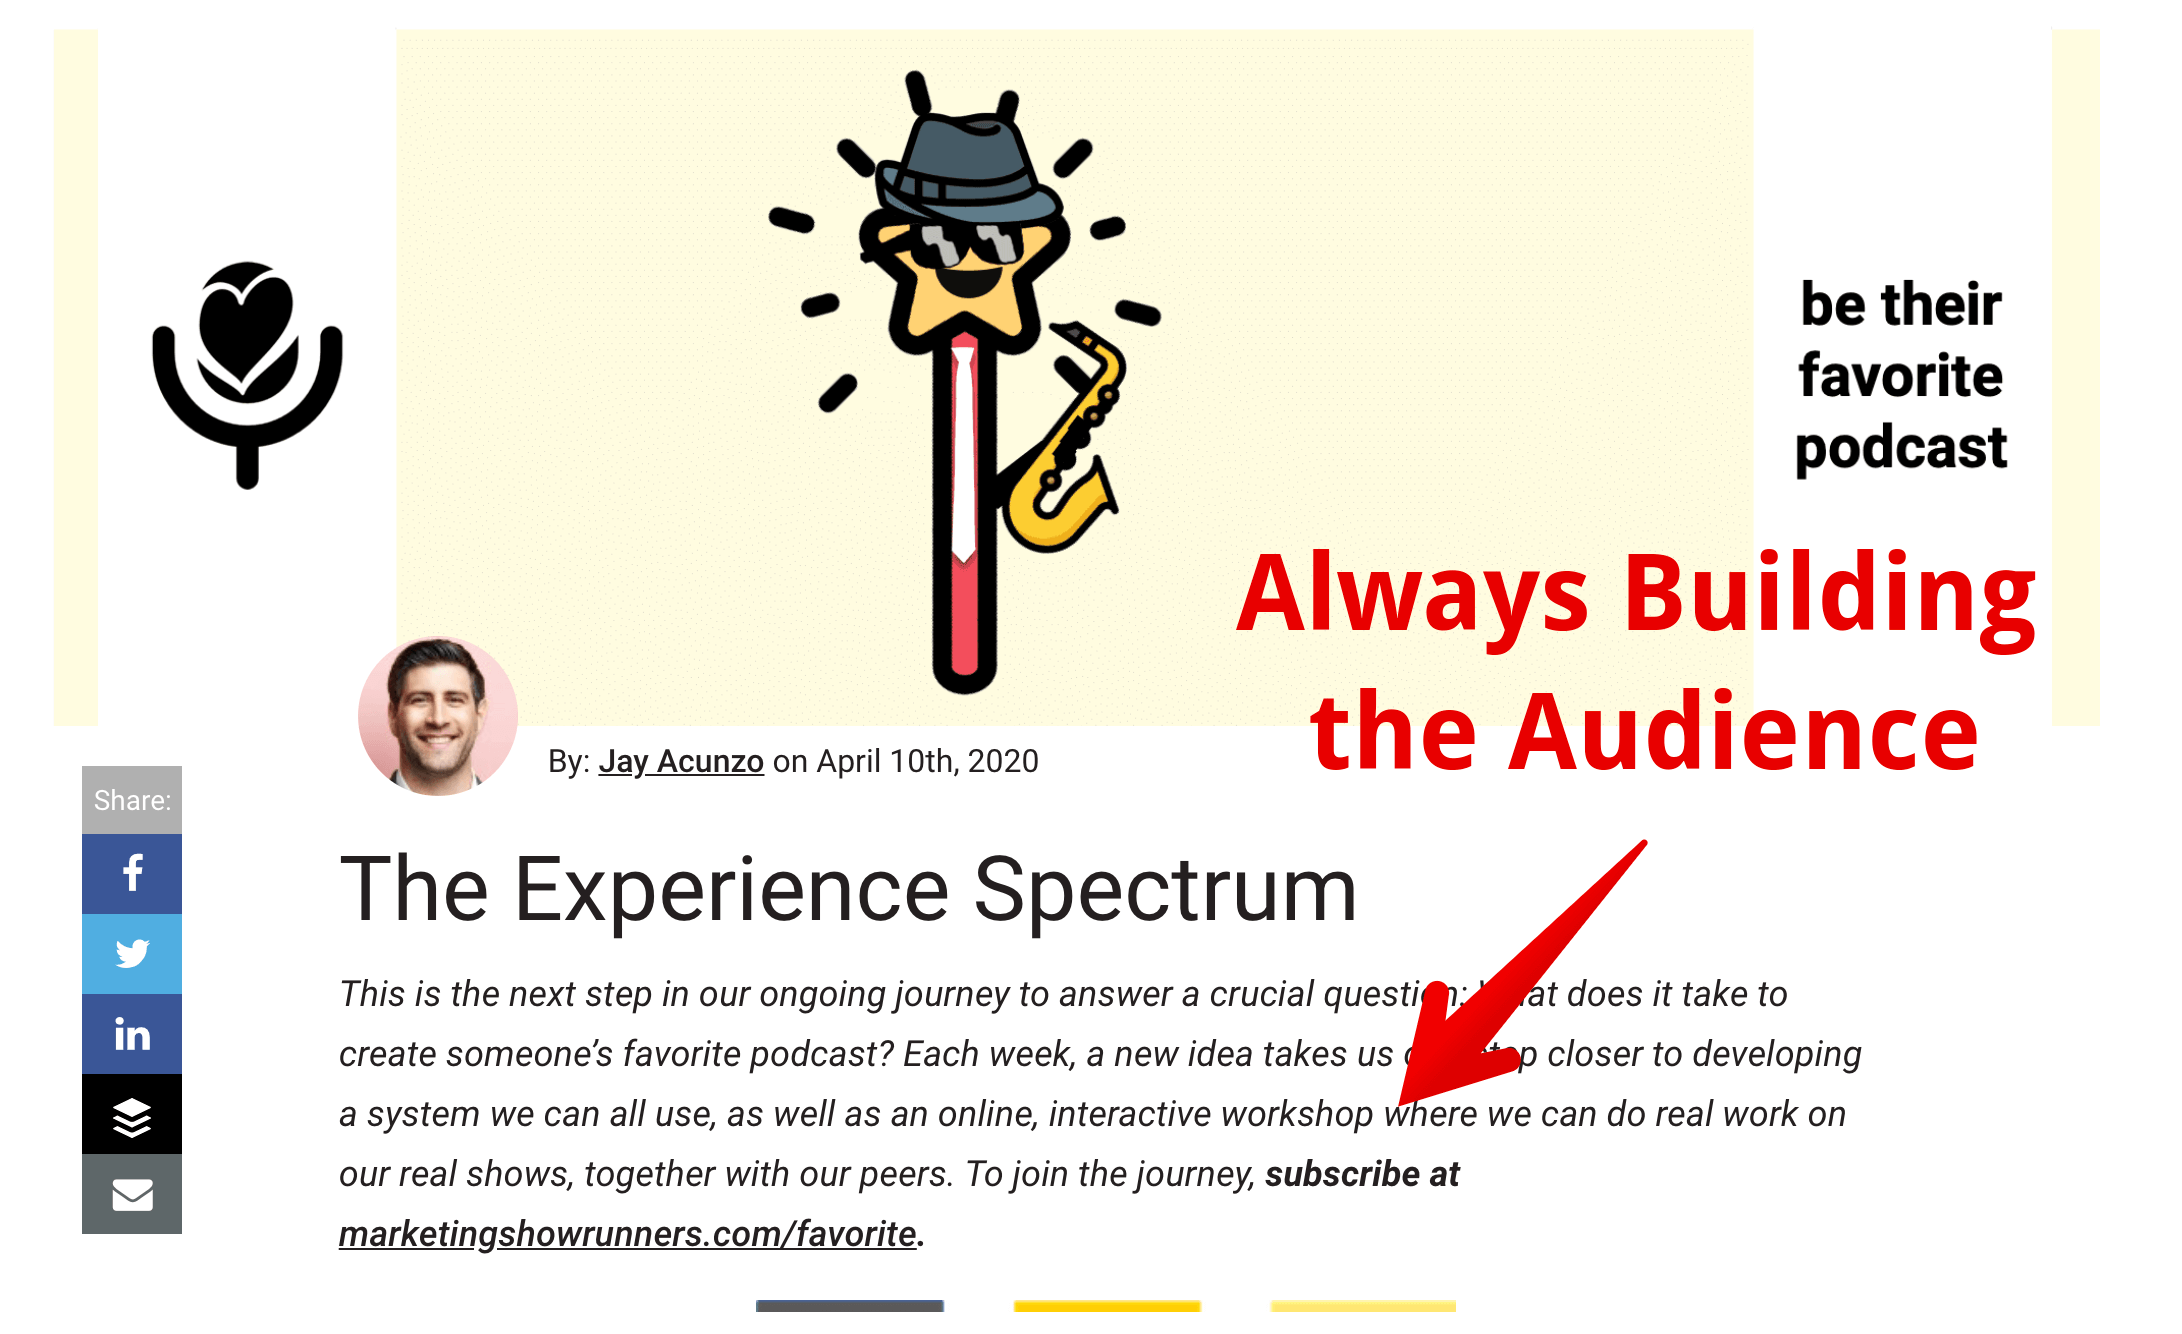 deconstructing content jay acunzo the experience spectrum business goal alignment